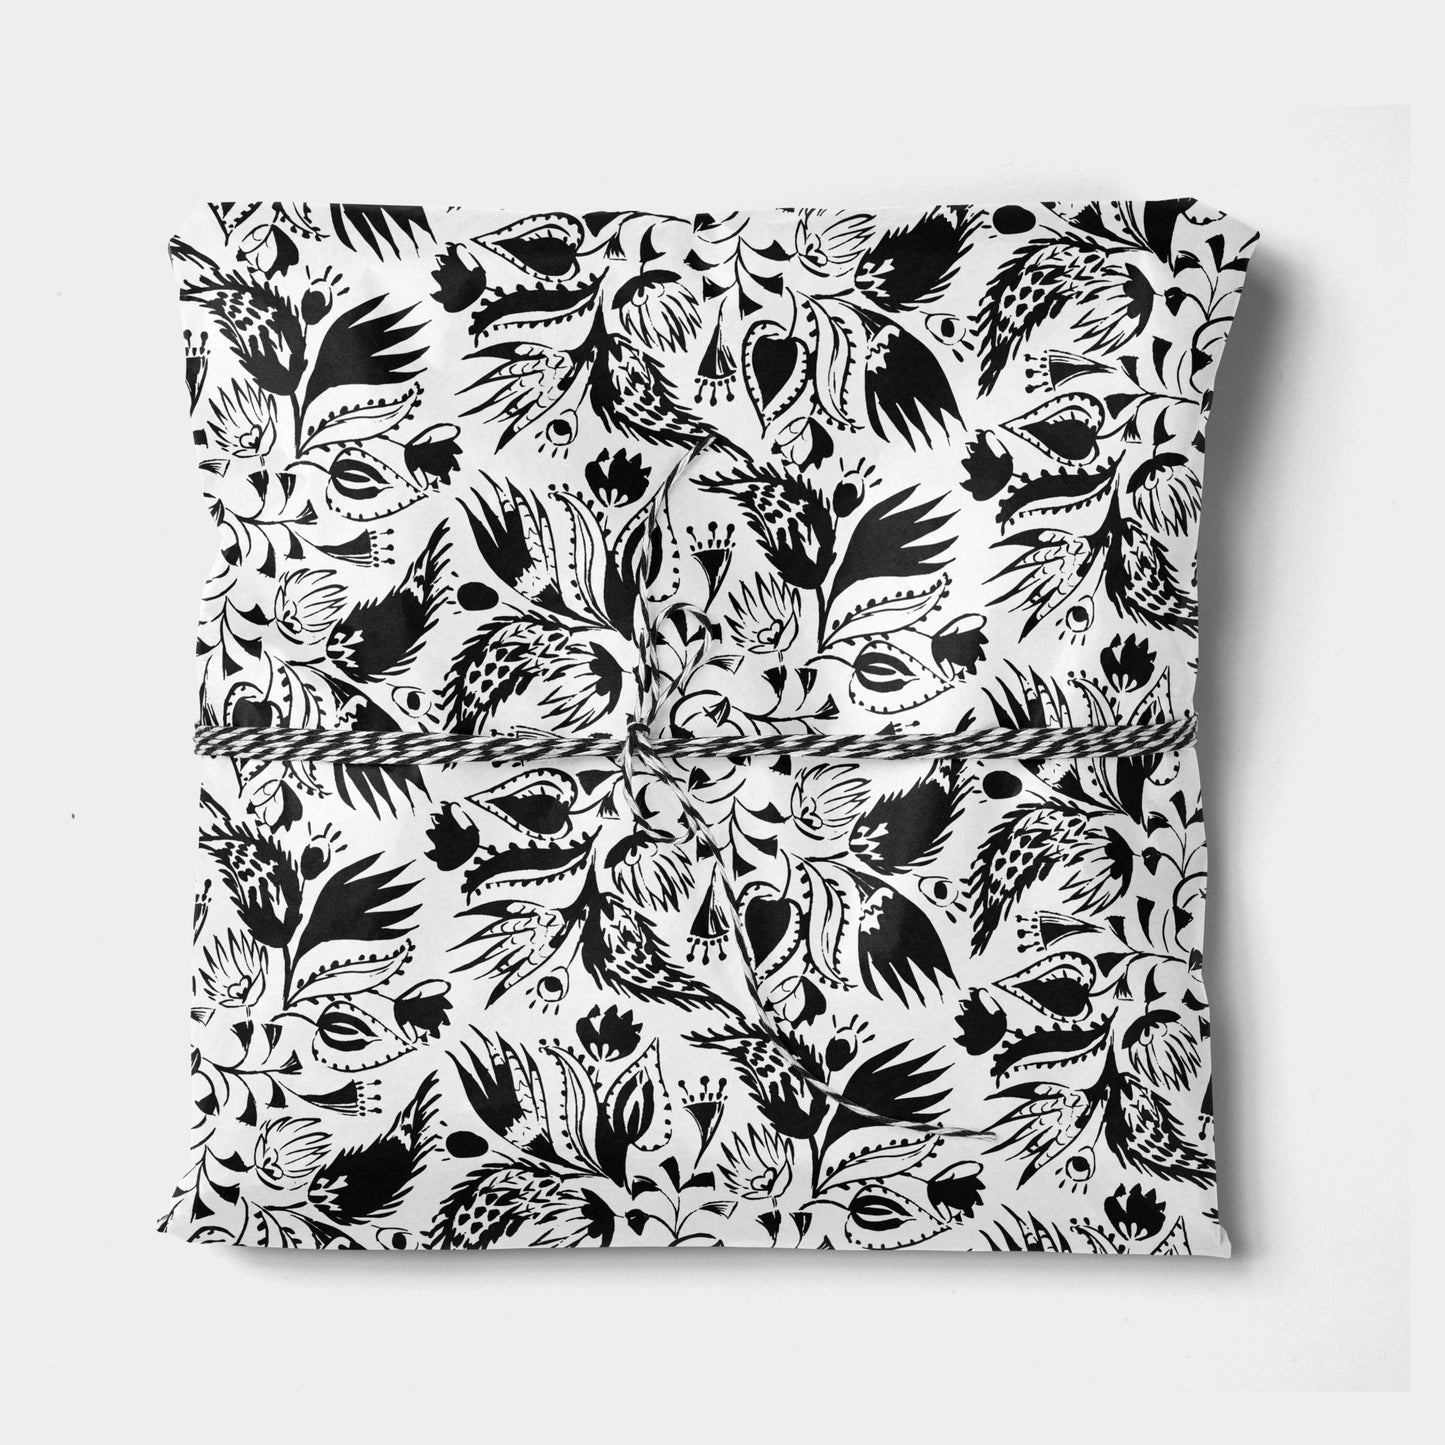 Black and White Illustrated Floral Lace